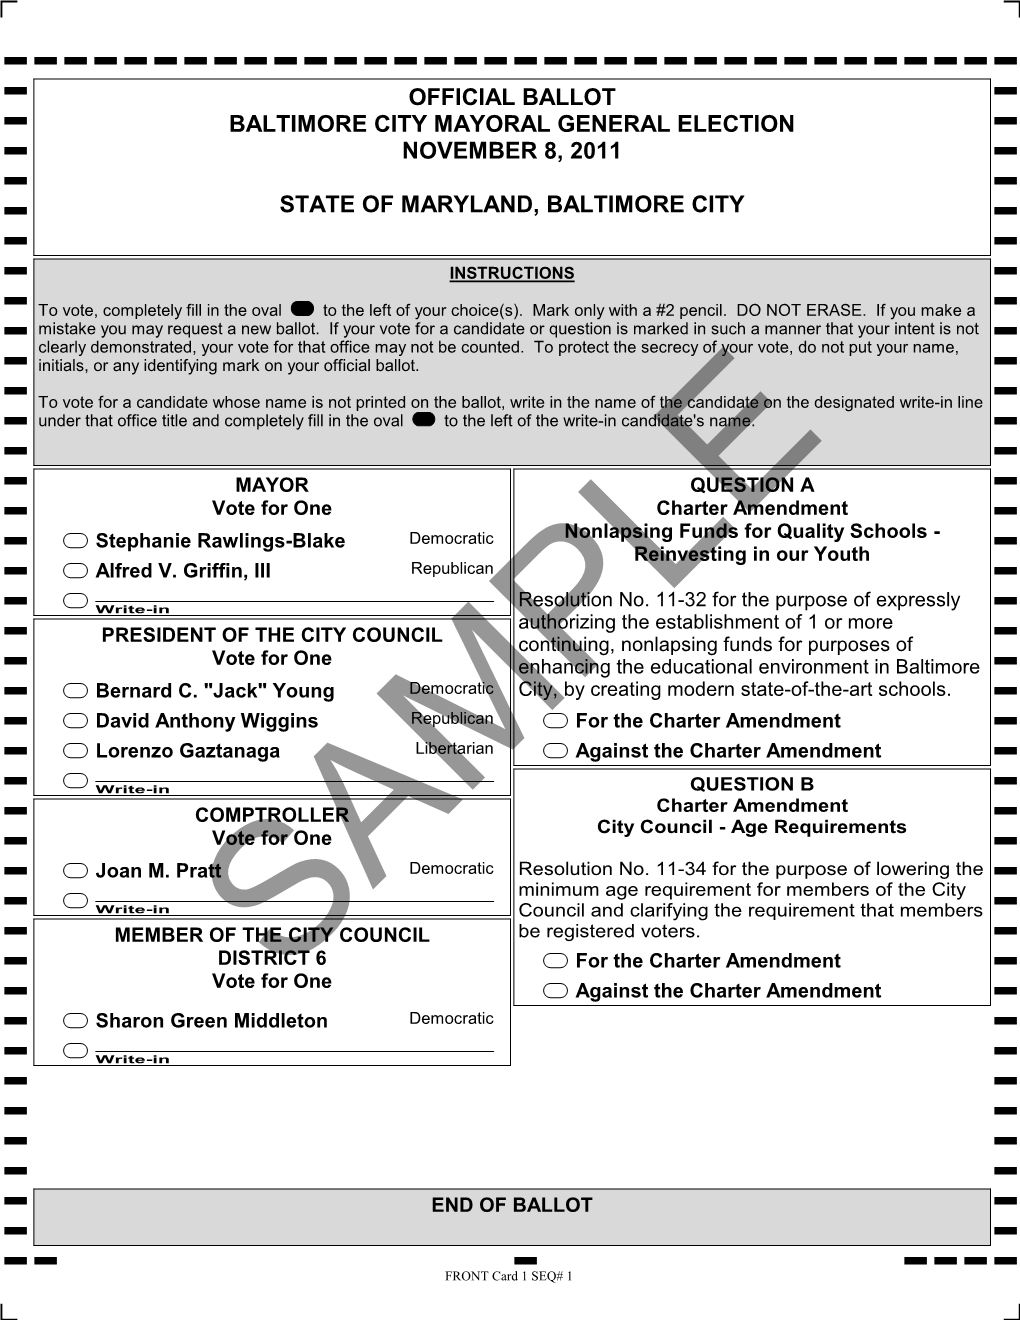 Sample Ballot Proofs for the 2011 Baltimore City Mayoral General